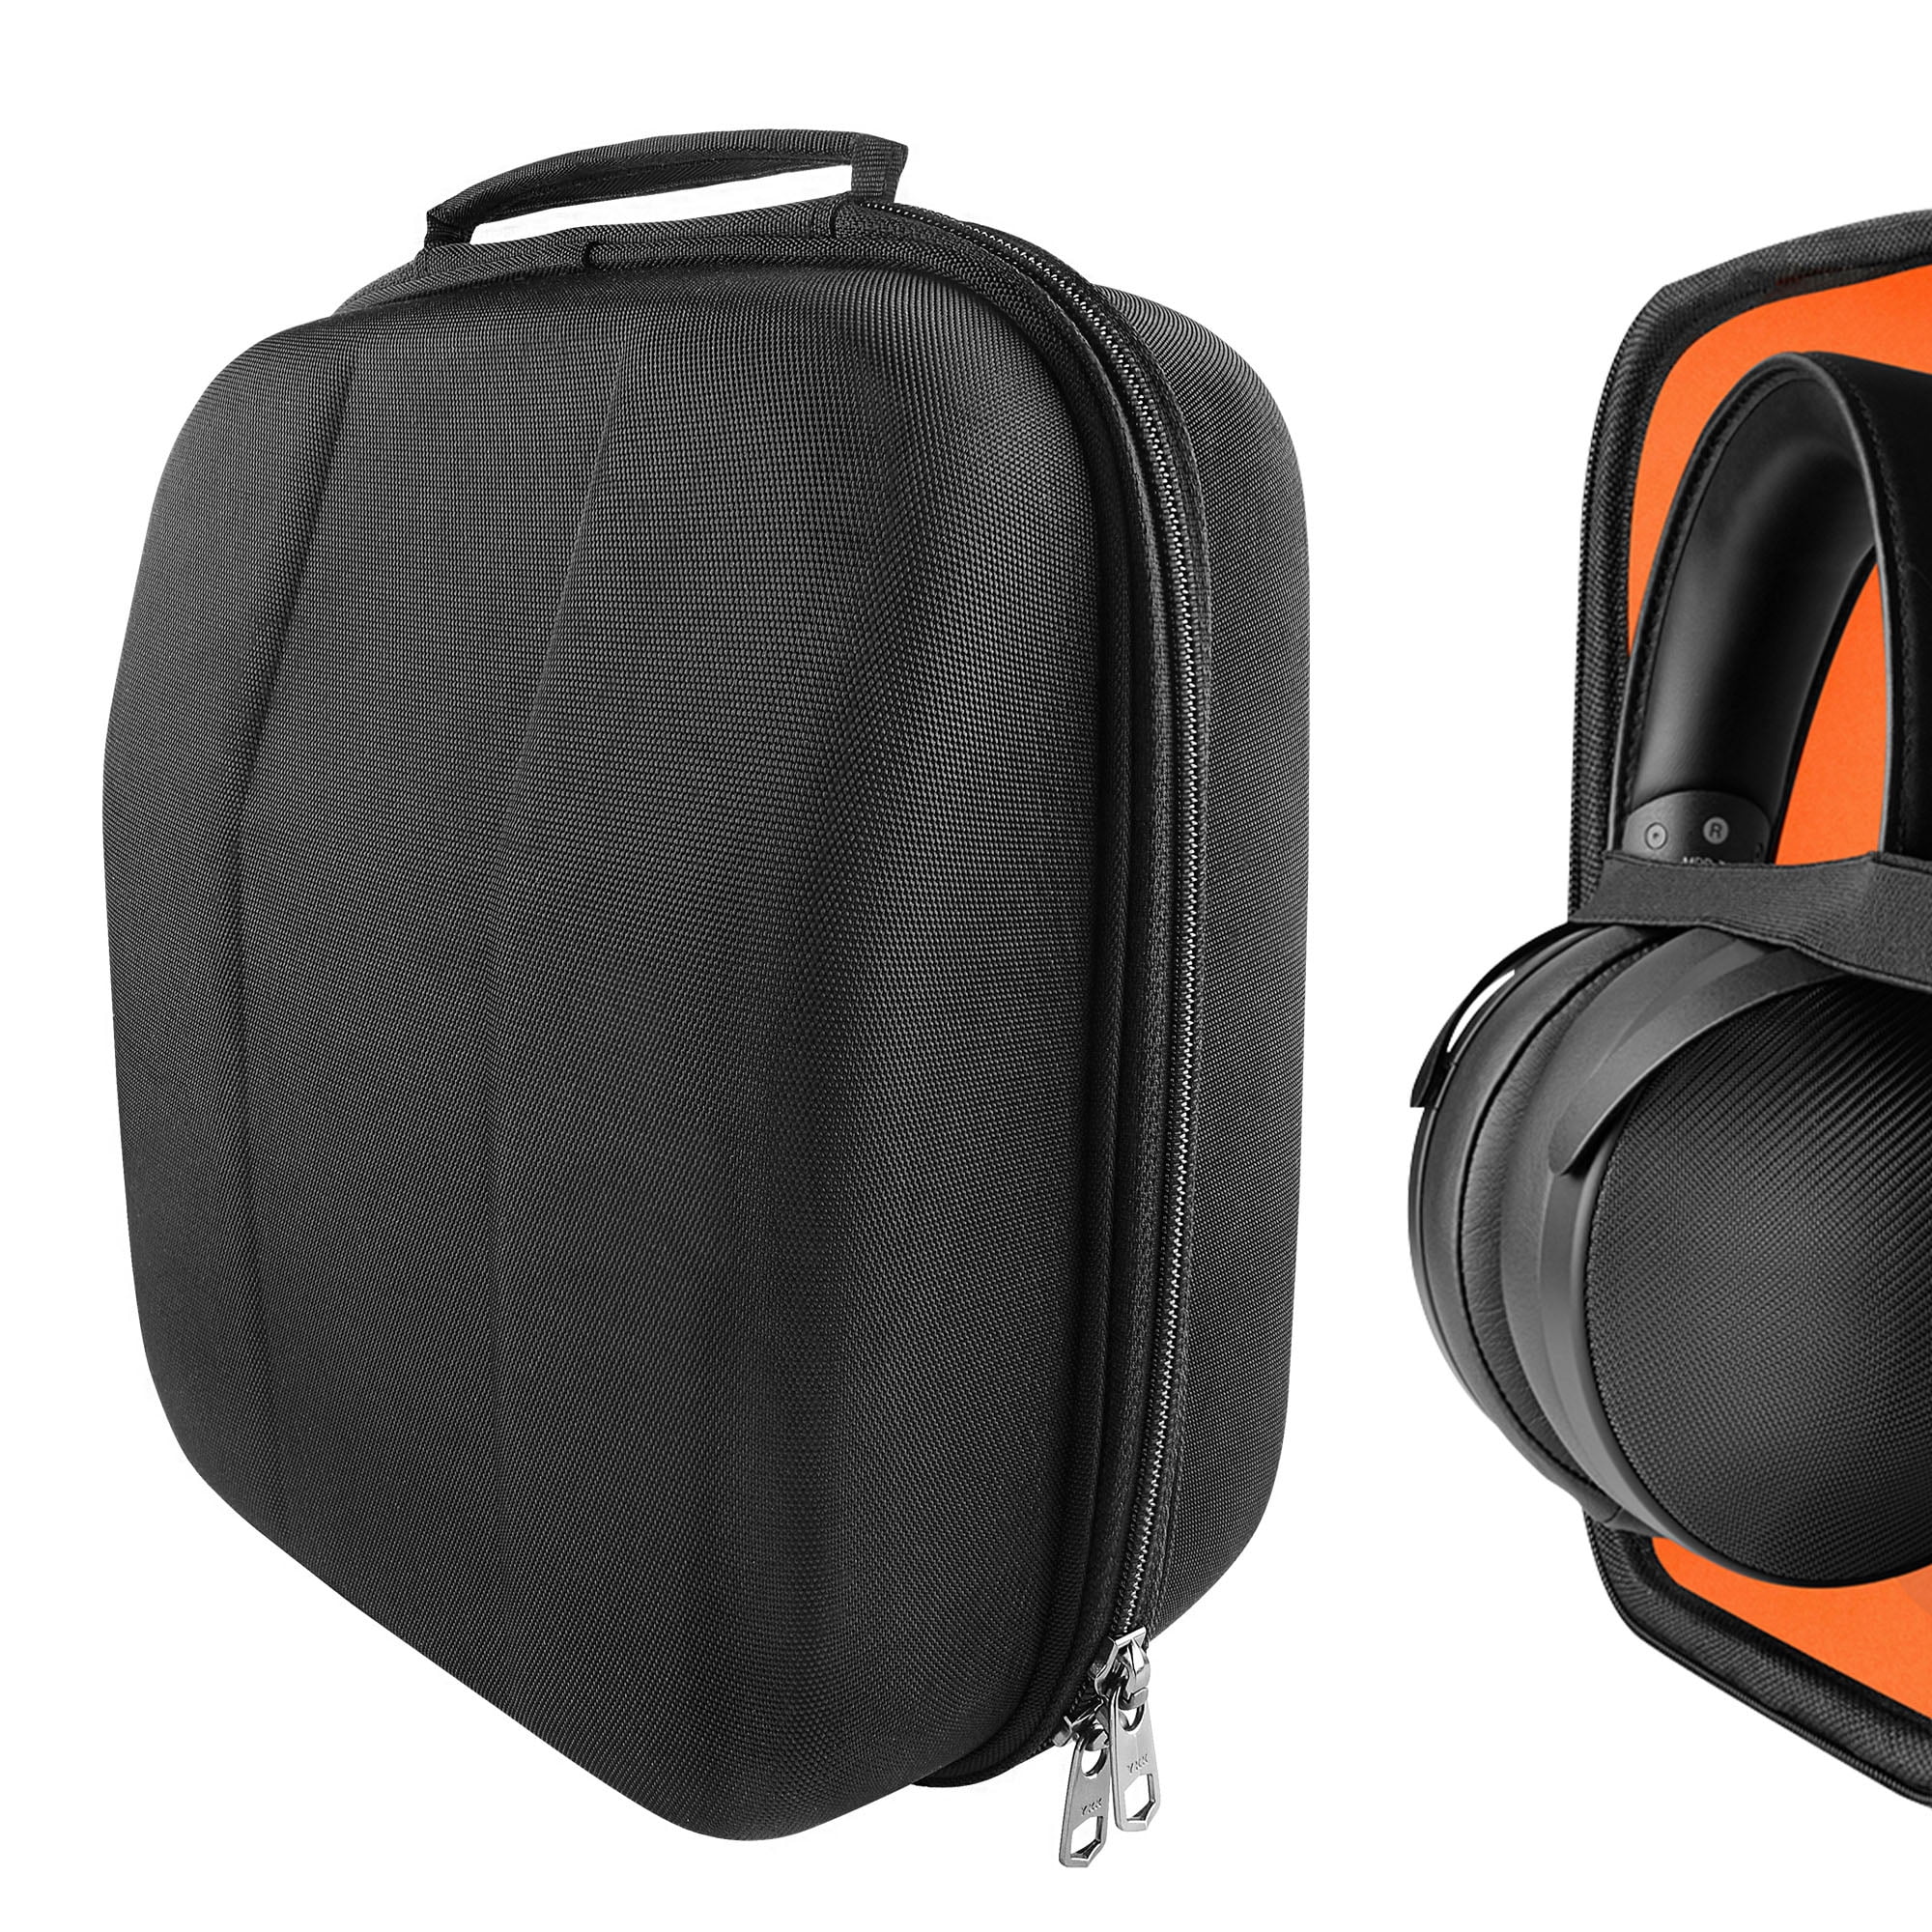 UltraShell Headphones Case for Large Sized Headphones, Replacement Shell Travel Carrying Bag with Storage, Compatible with Denon AH-D9200, SONY MDR-Z1R (Black) - Walmart.com